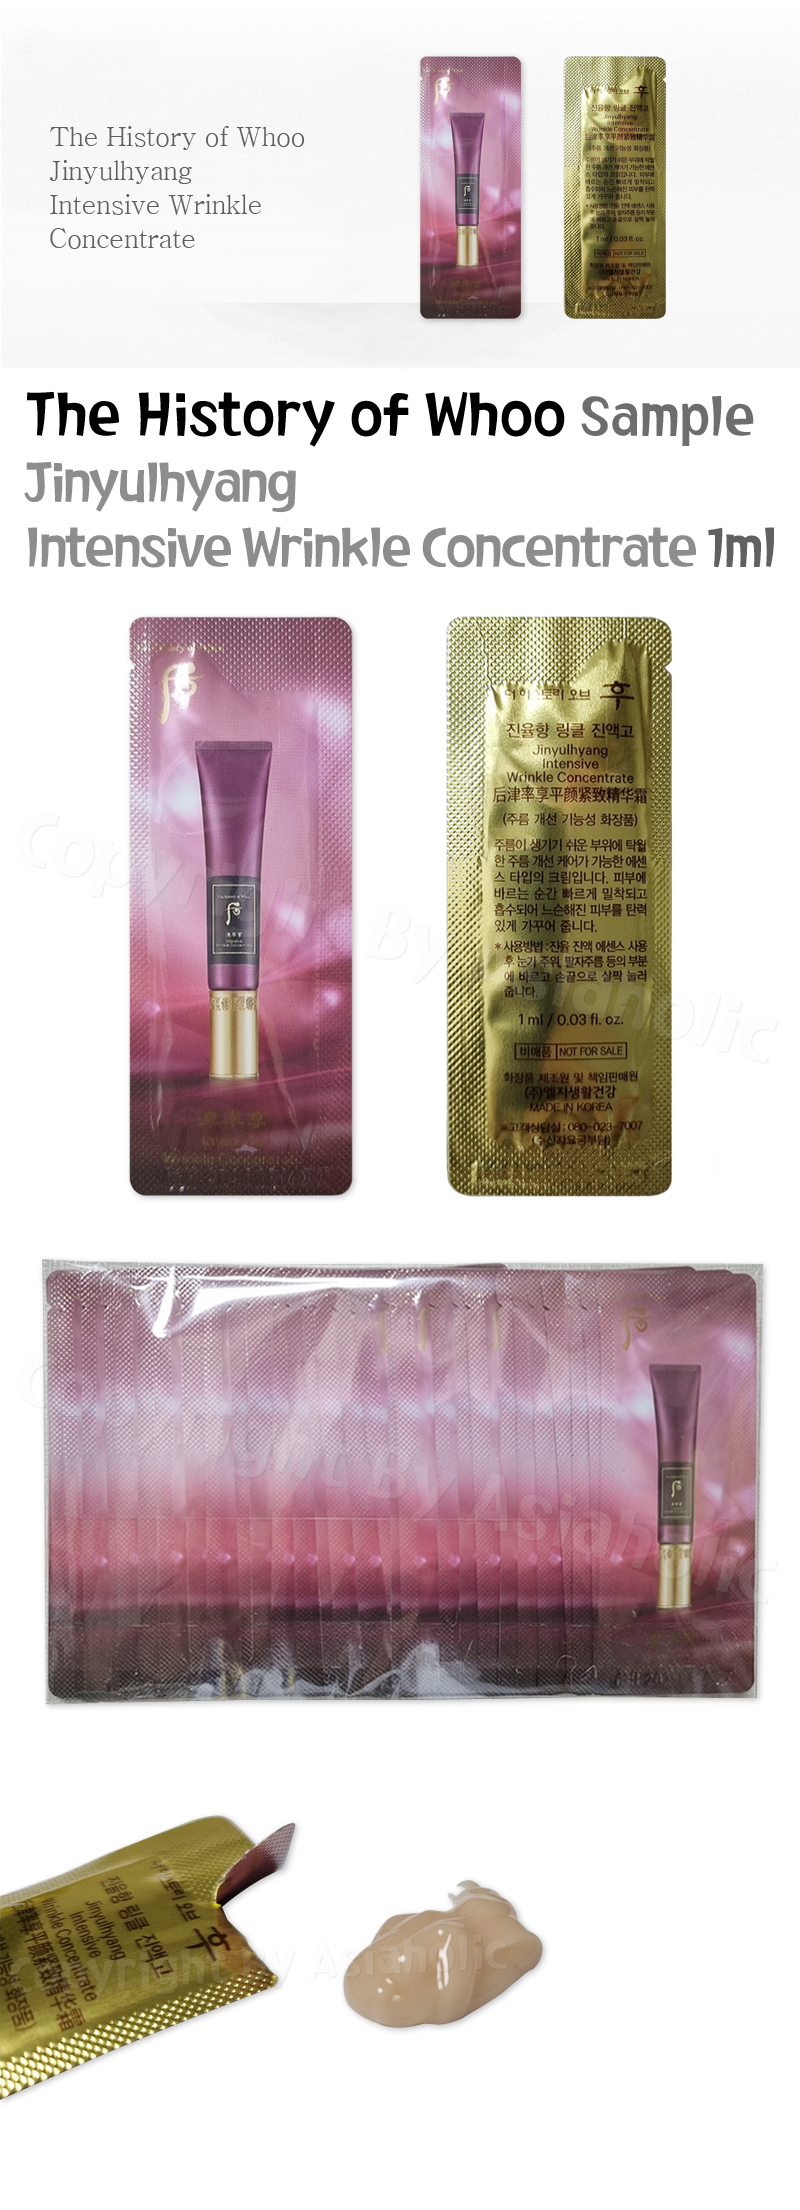 The history of Whoo Intensive Wrinkle Concentrate 1ml x 10pcs (10ml) Sample Newest Version